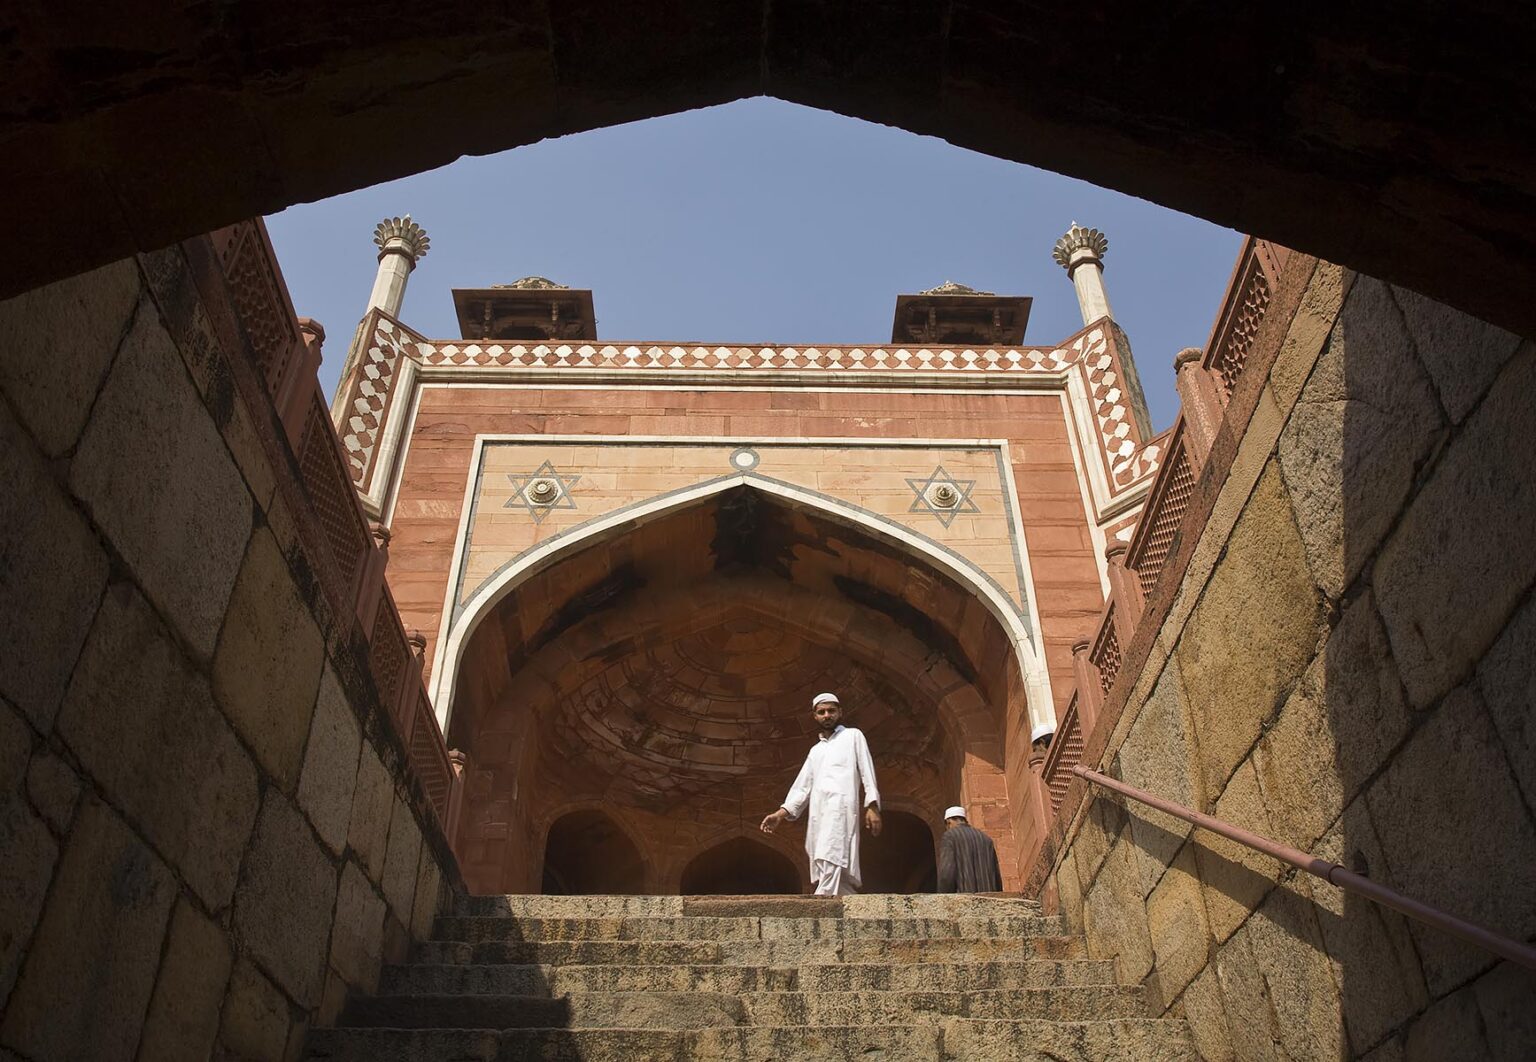 MUSLIM MAN at HUMAYUN'S TOMB which was built of white marble and red sandstone in1565 and is a fine example of MUGHAL architecture - NEW DELHI, INDIA